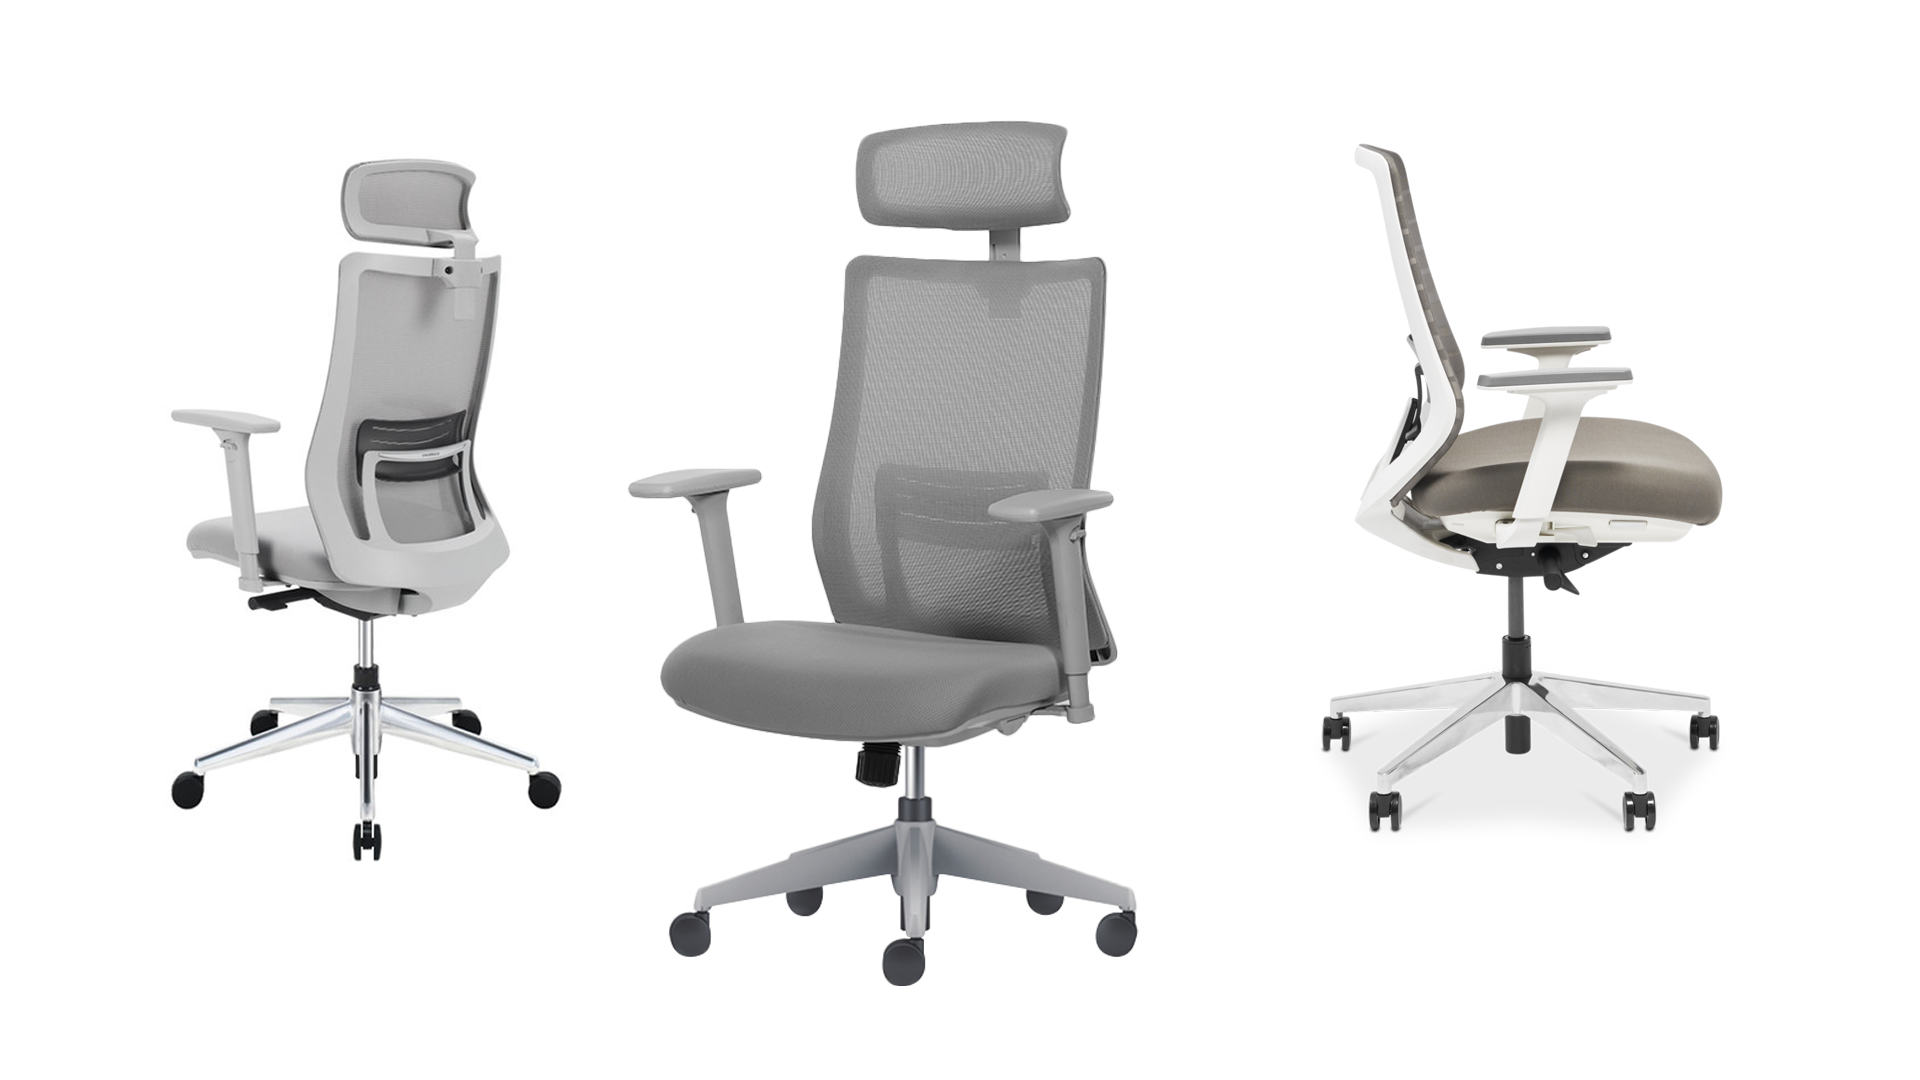 Most comfortable office chairs, desk chairs and standard office chairs for ergonomic option to sit upright